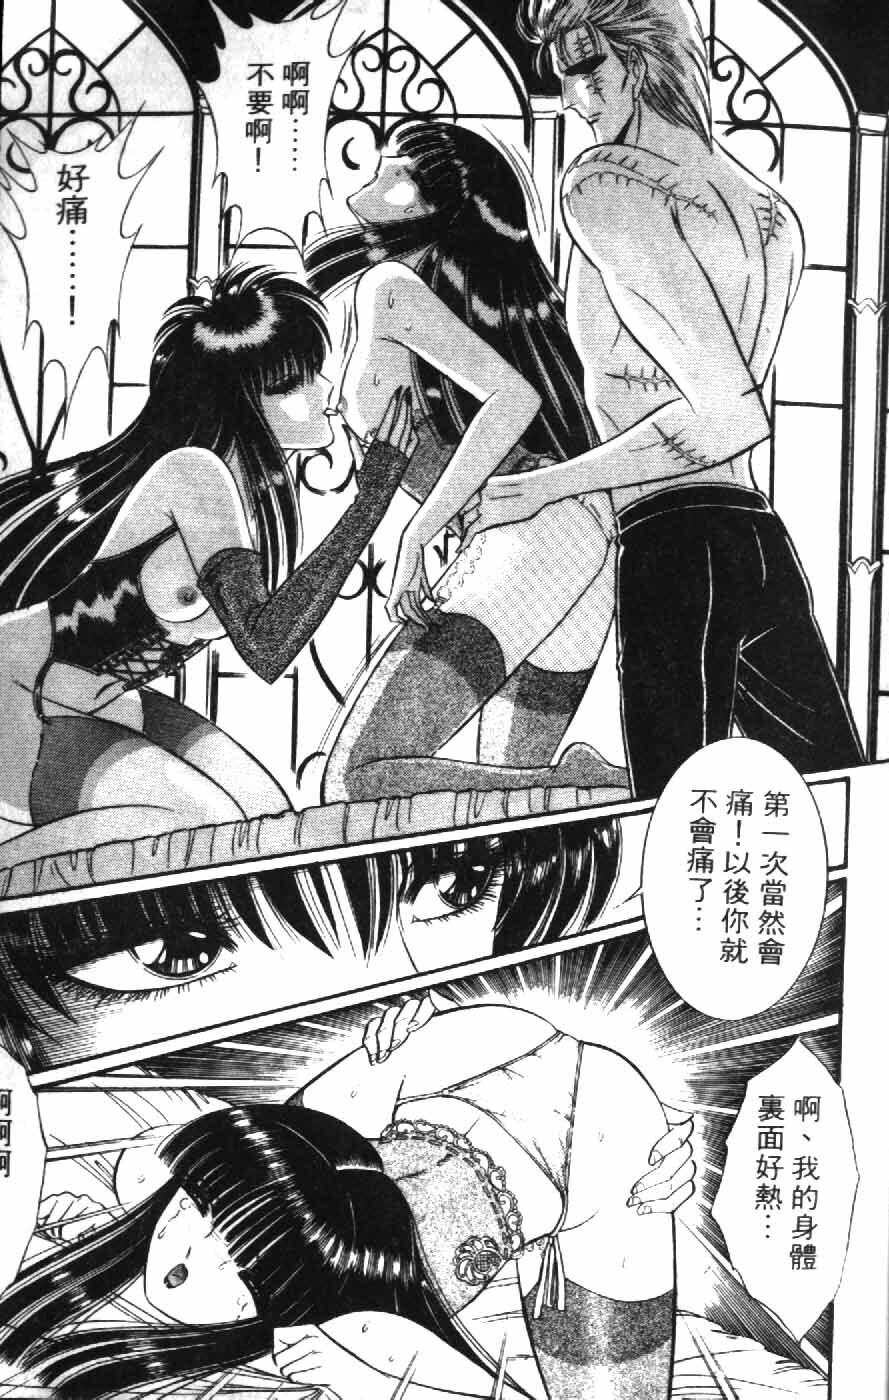 [Senno Knife] Ouma ga Horror Show 1 - Trans Sexual Special Show 1 | 顫慄博覽會 1 [Chinese] page 17 full